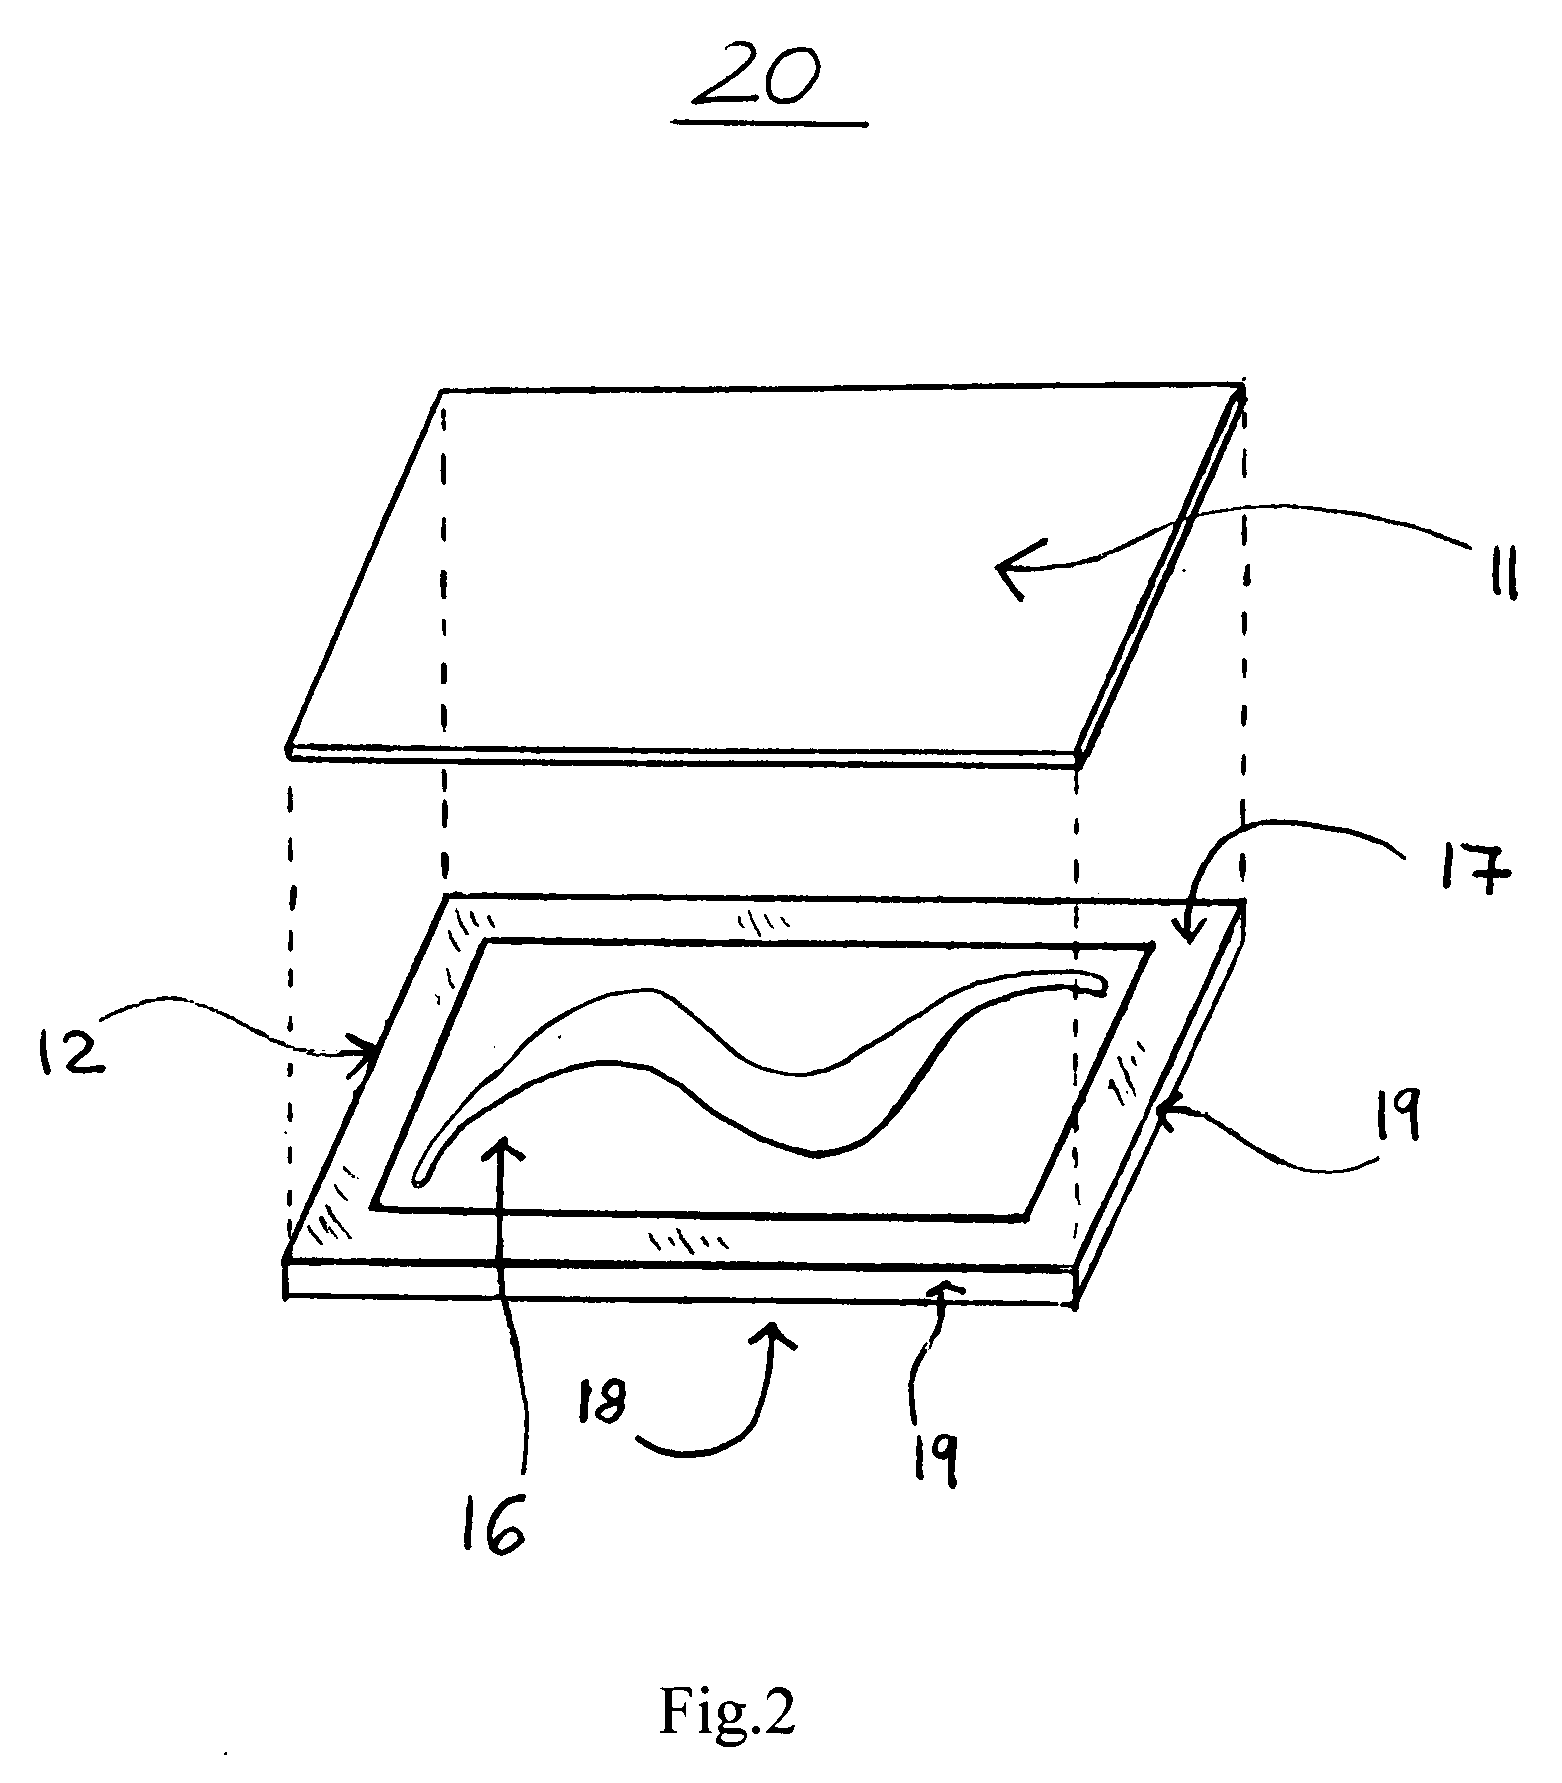 Front-loading display system